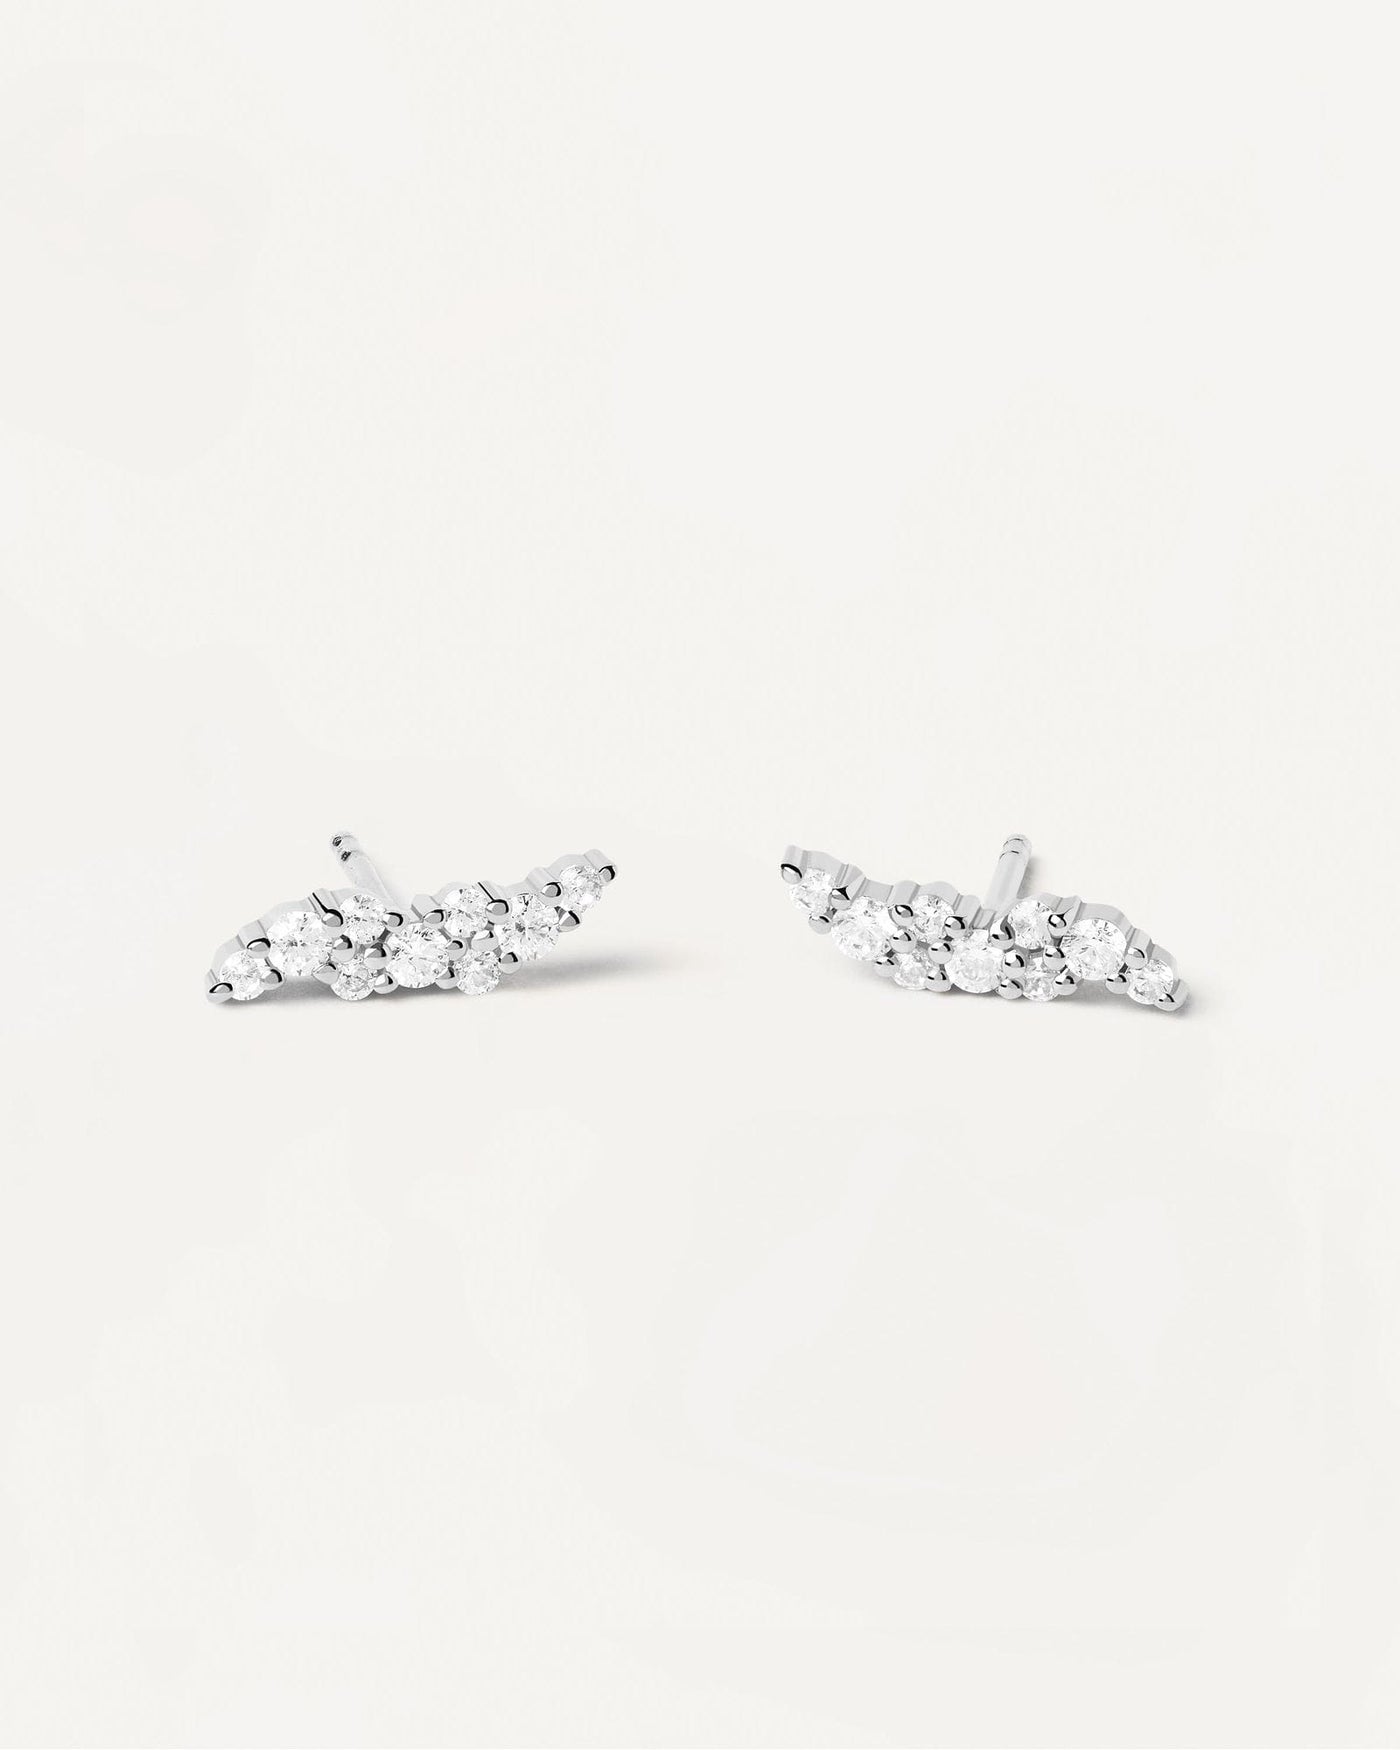 2024 Selection | Natura Silver Earrings. Basic sterling silver earrings with small white crystals. Get the latest arrival from PDPAOLA. Place your order safely and get this Best Seller. Free Shipping.